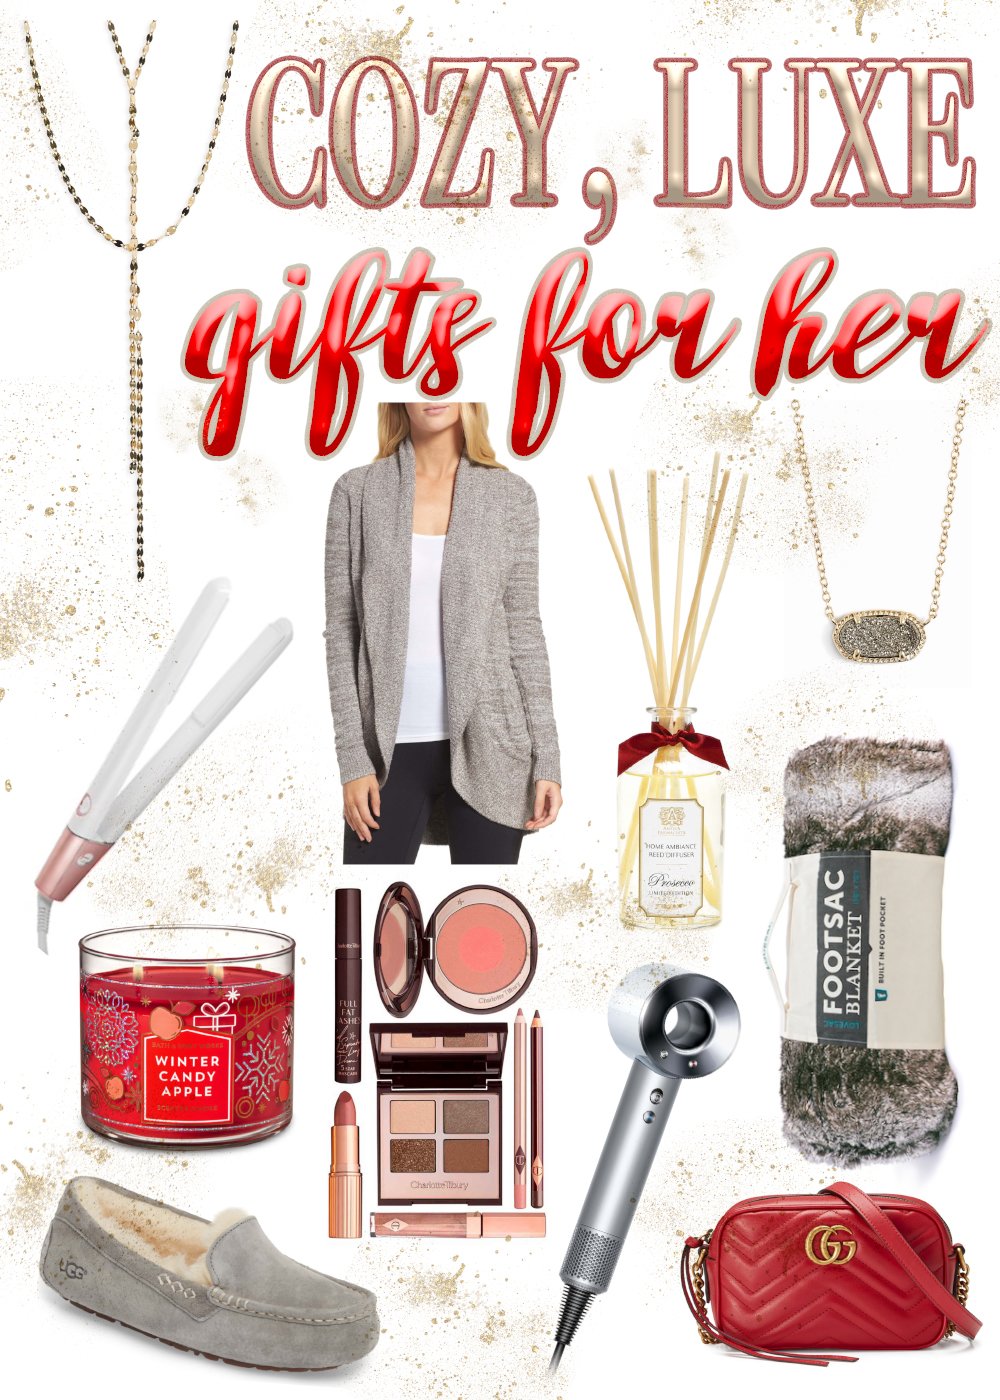 Aggregate 109+ luxury gifts for girlfriend latest